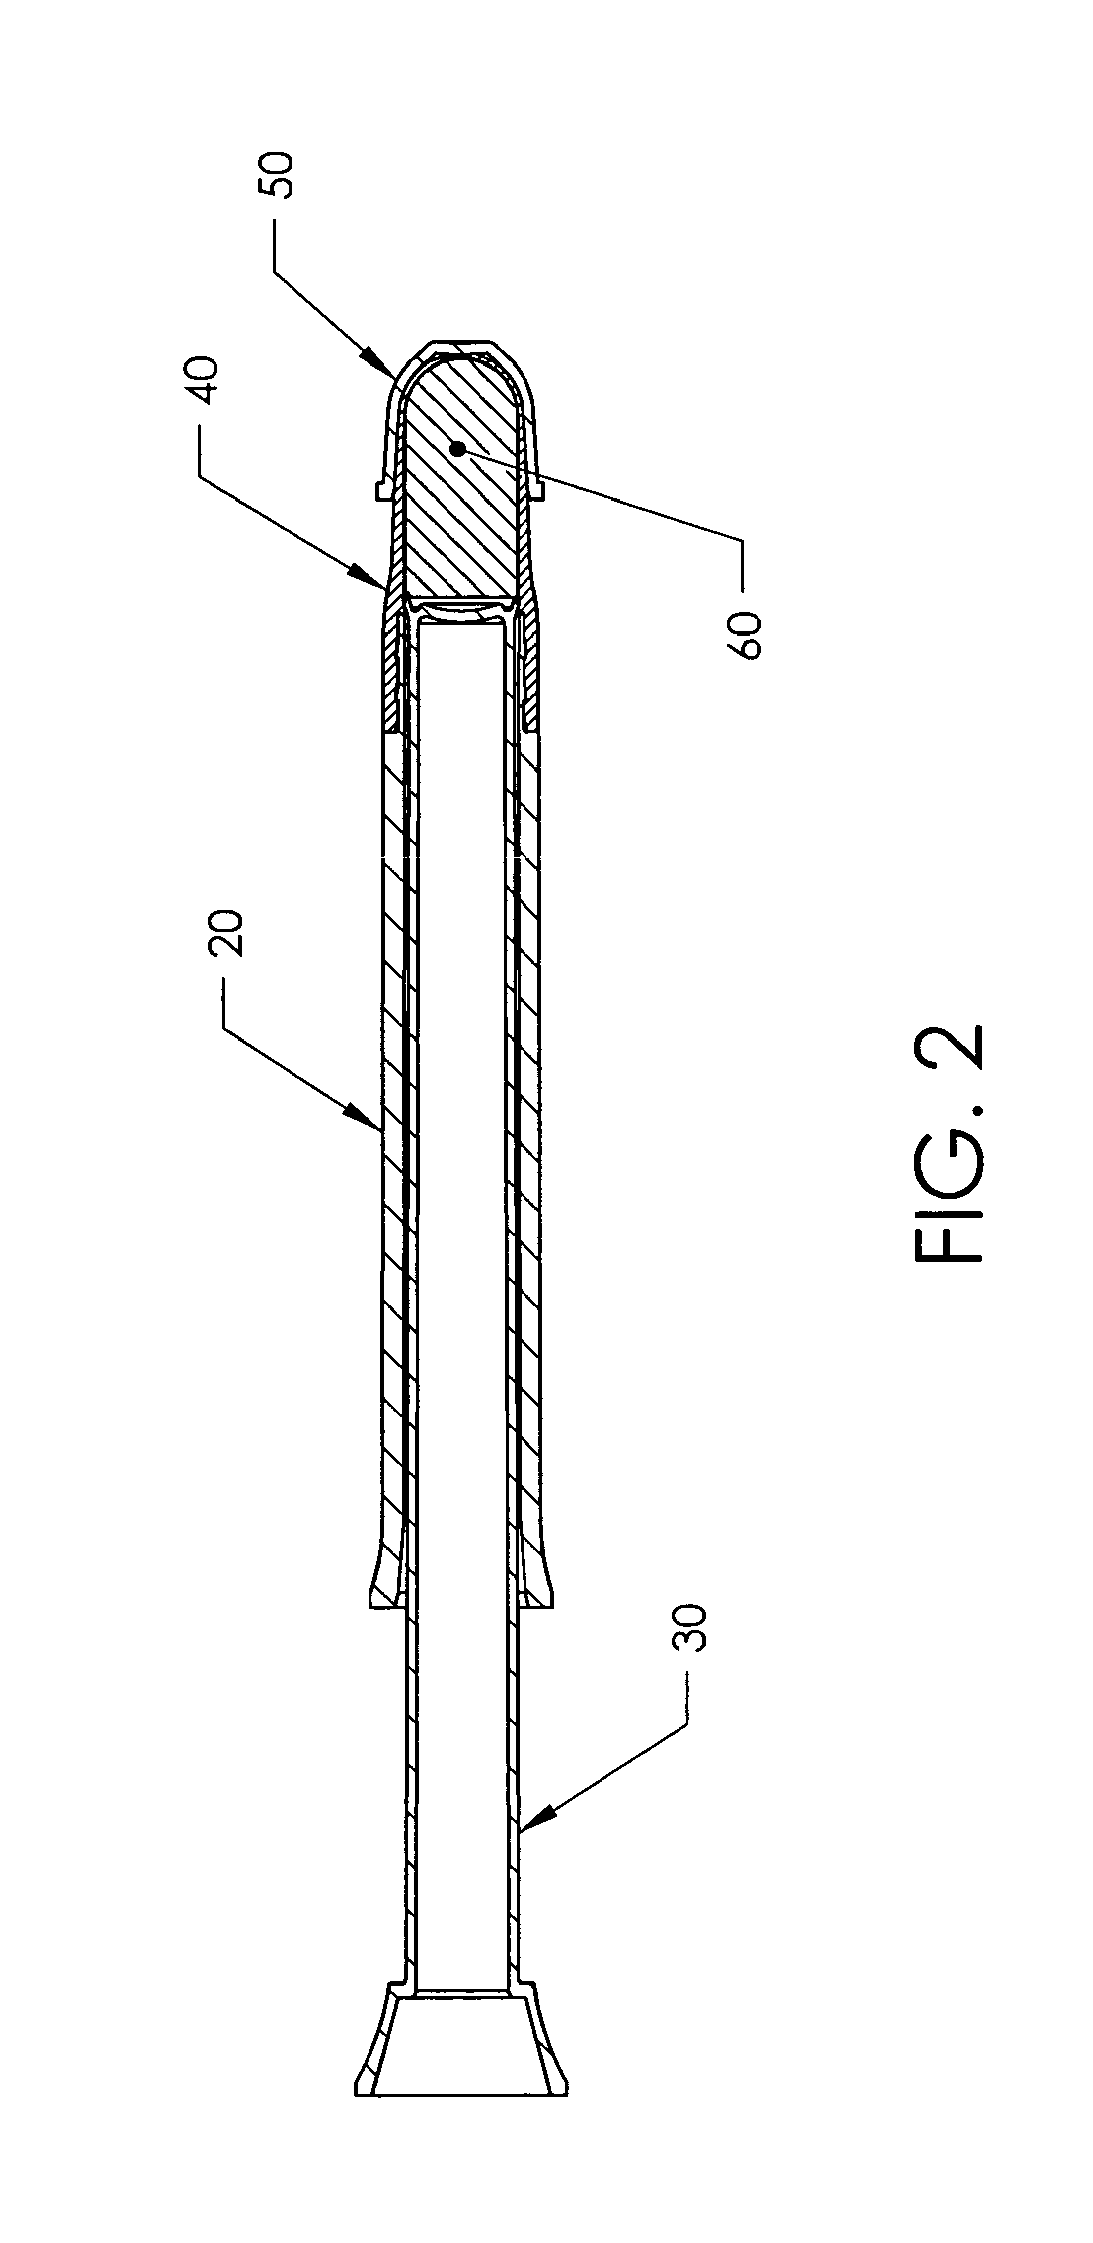 Applicator for applying powder formulations and uses thereof